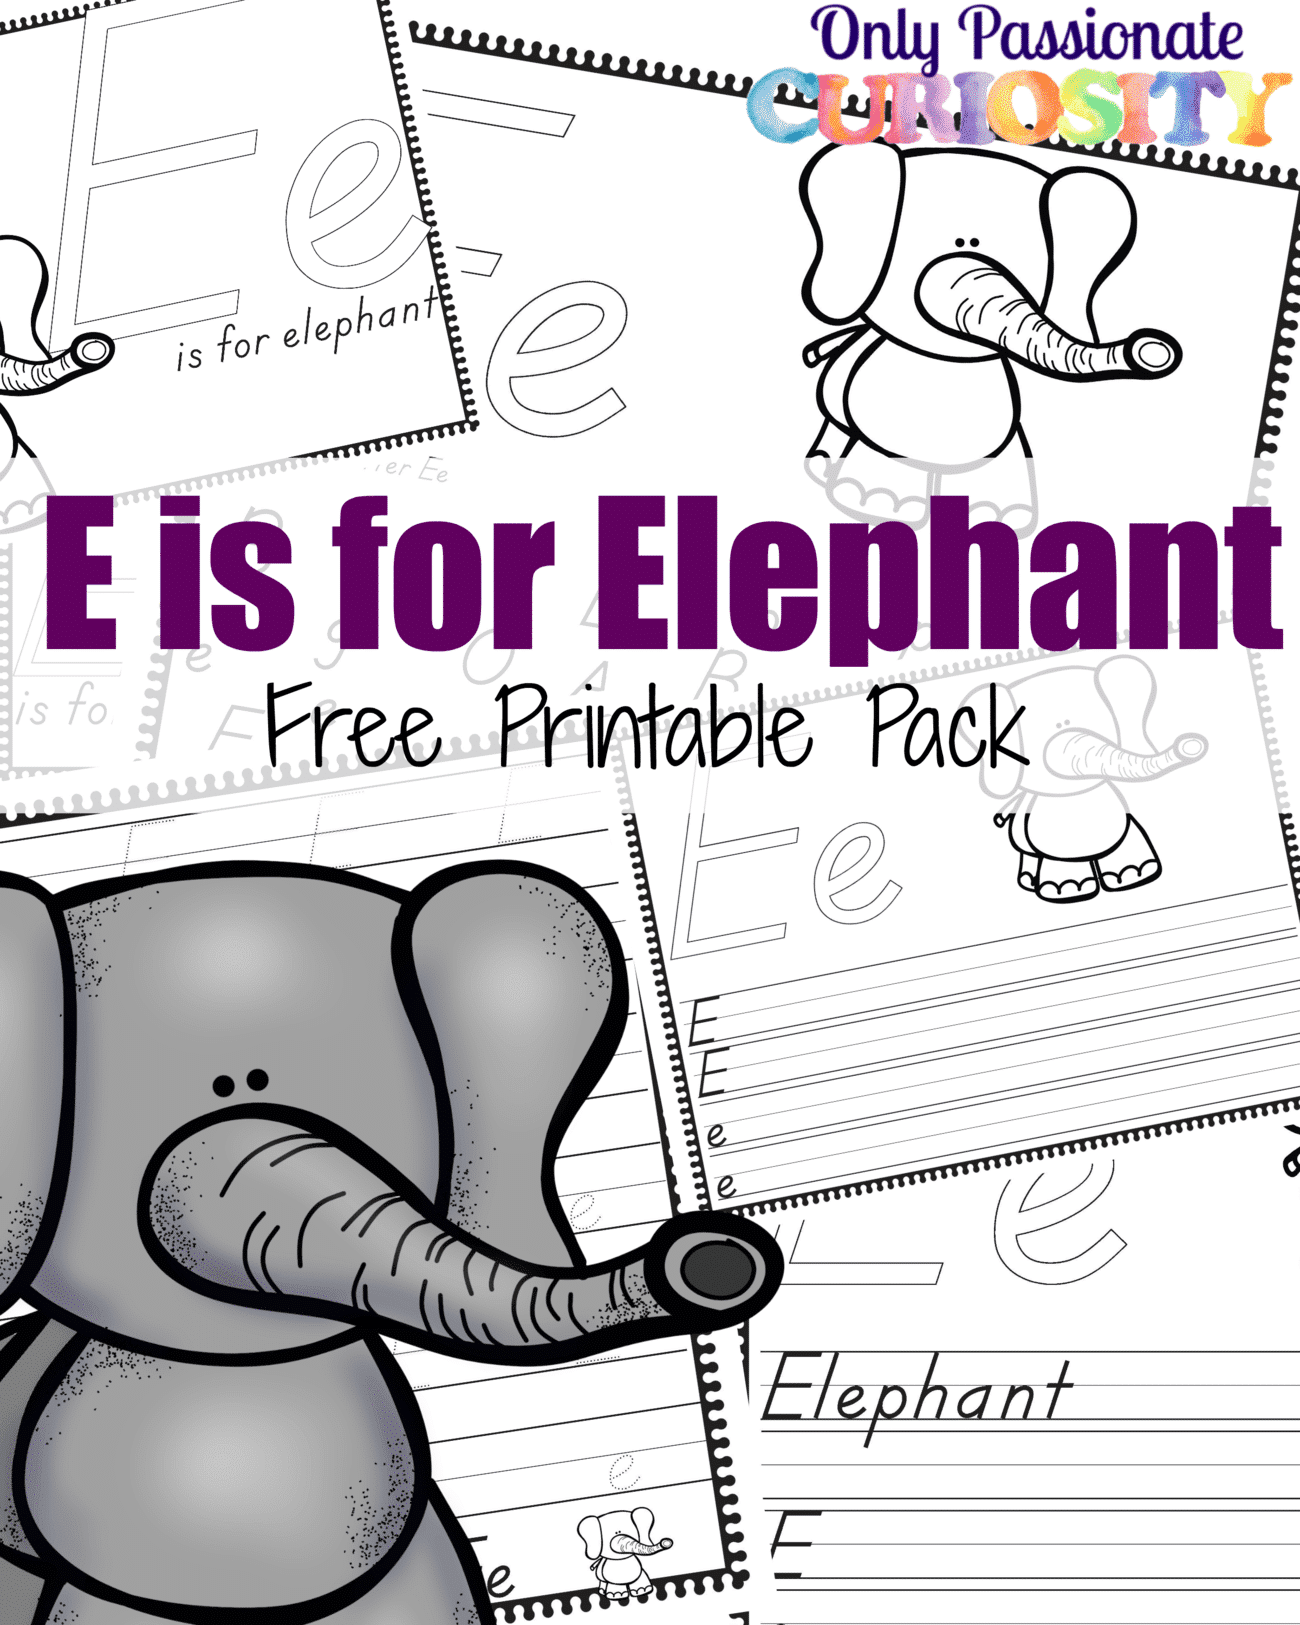 E is for Elephant Handwriting Activity Pack